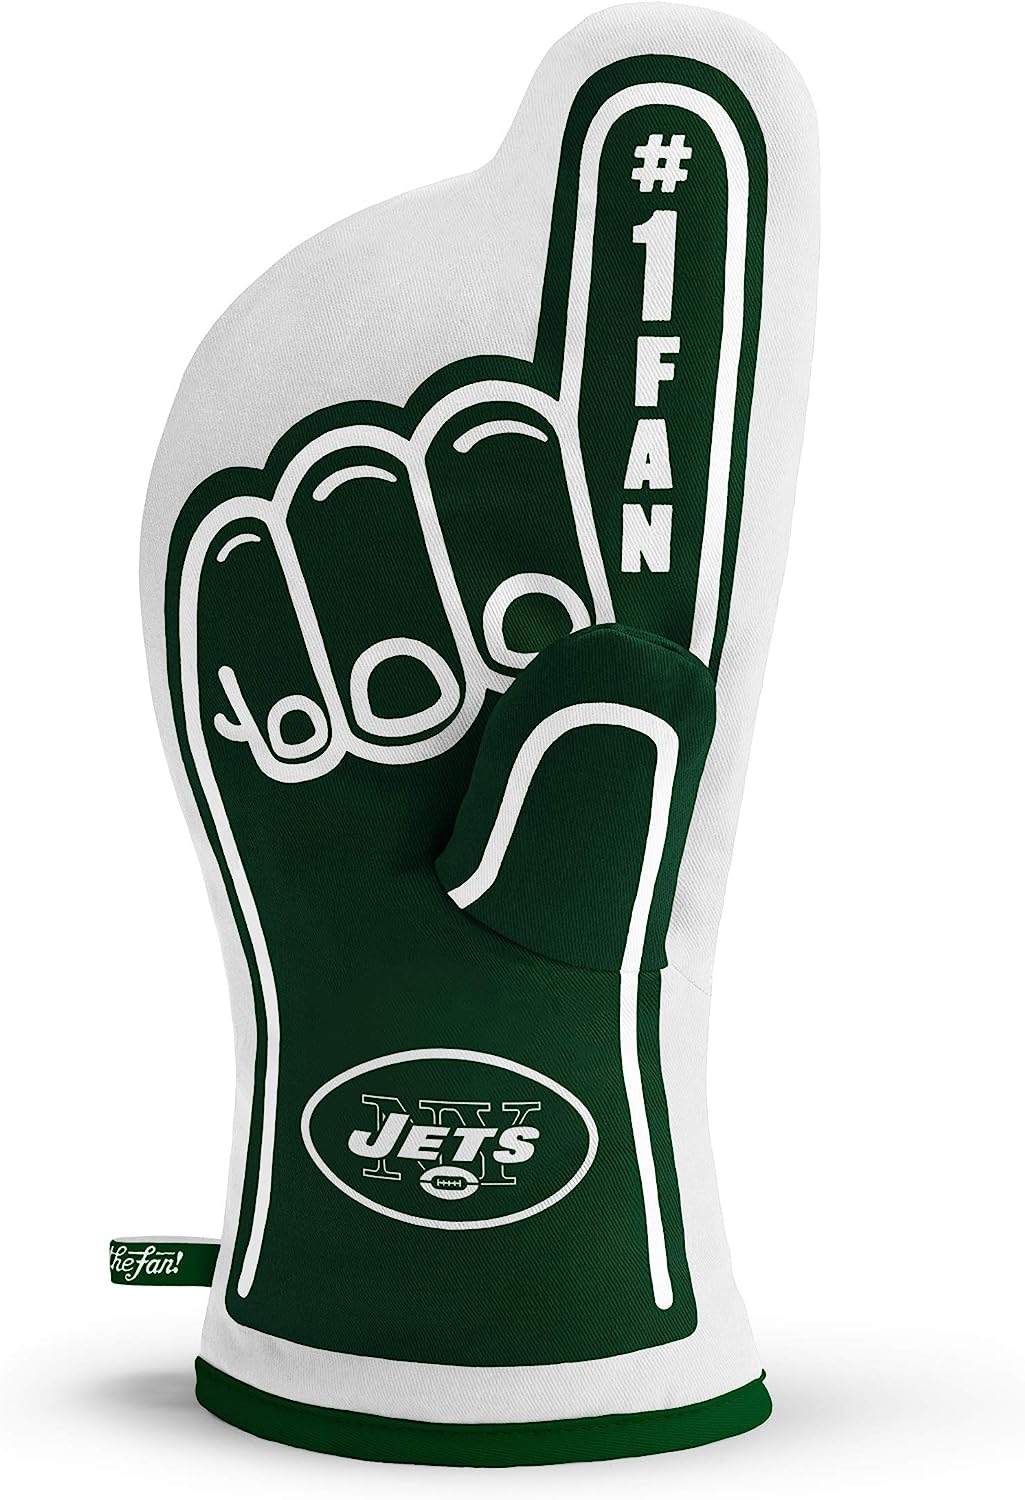 NFL Number One Fan Oven Mitt (New York Jets) $5 + Free Shipping w/ Prime or on $25+